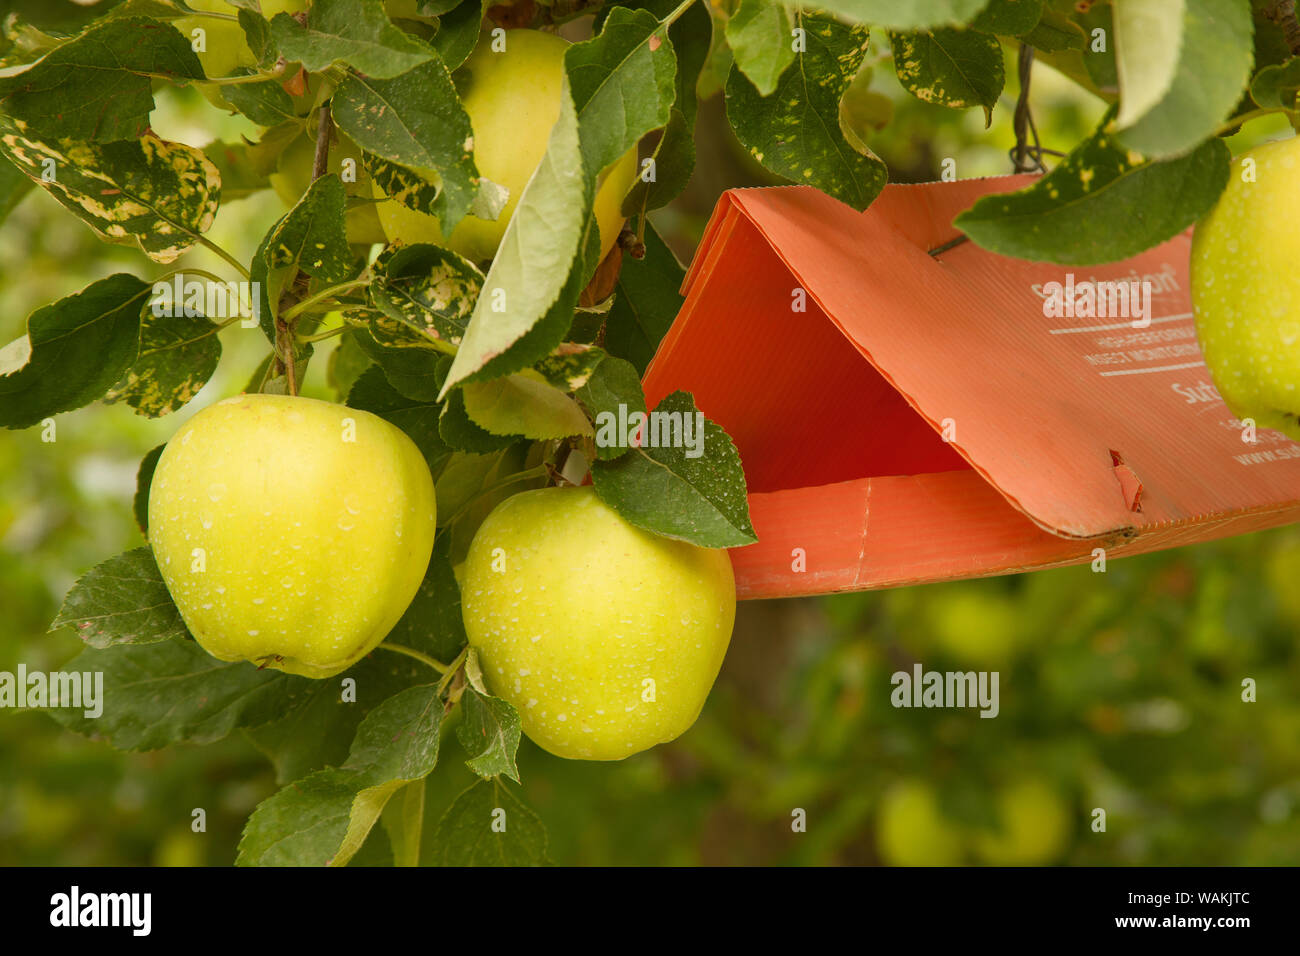 Wenatchee, Washington State, USA. Golden delicious apples on the tree and a Biolure Scenturion pest control trap beside them. Stock Photo